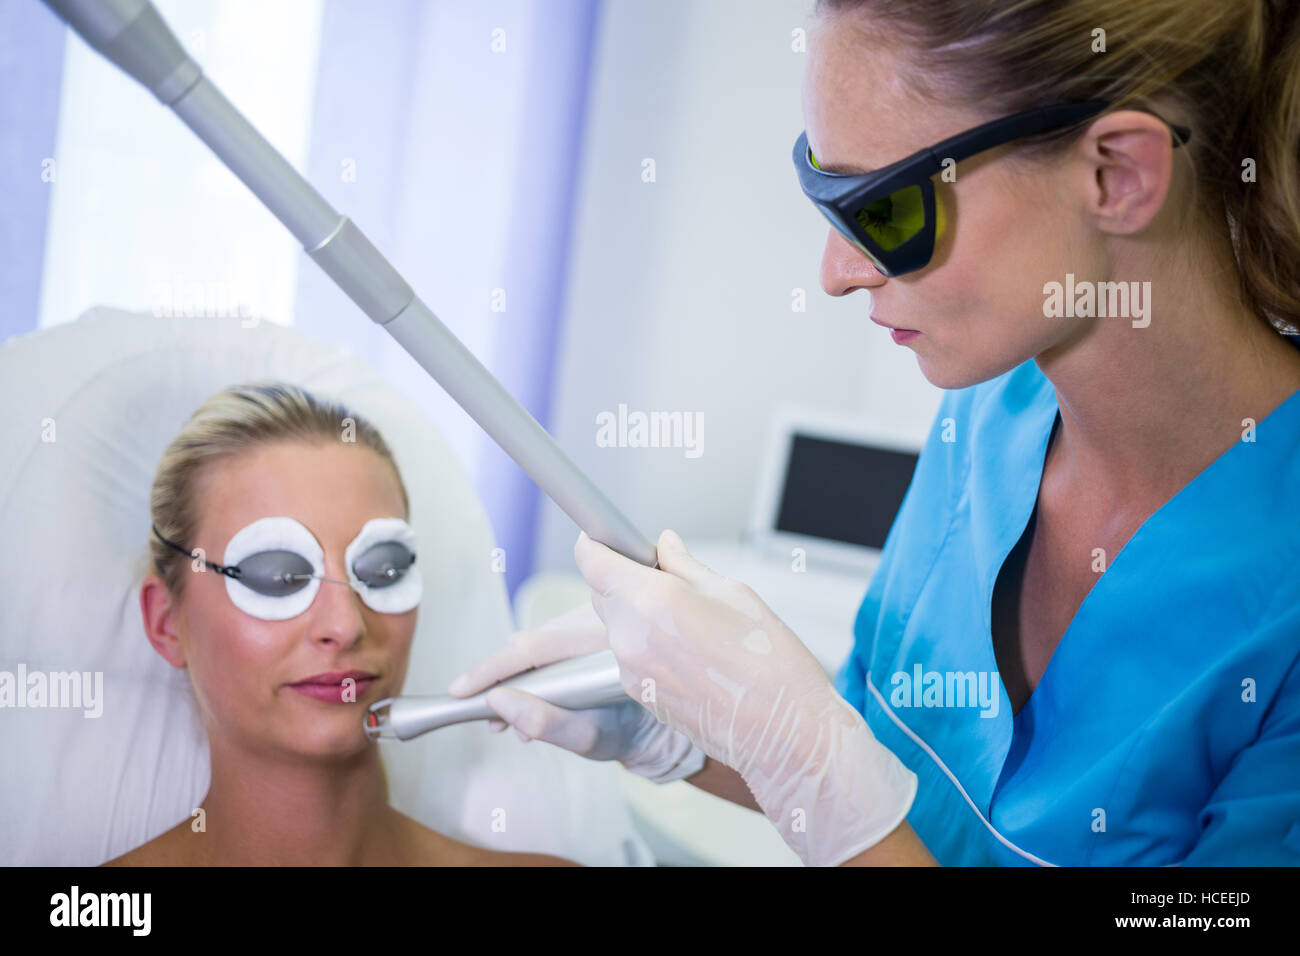 Female patient getting rf lifting procedure Stock Photo